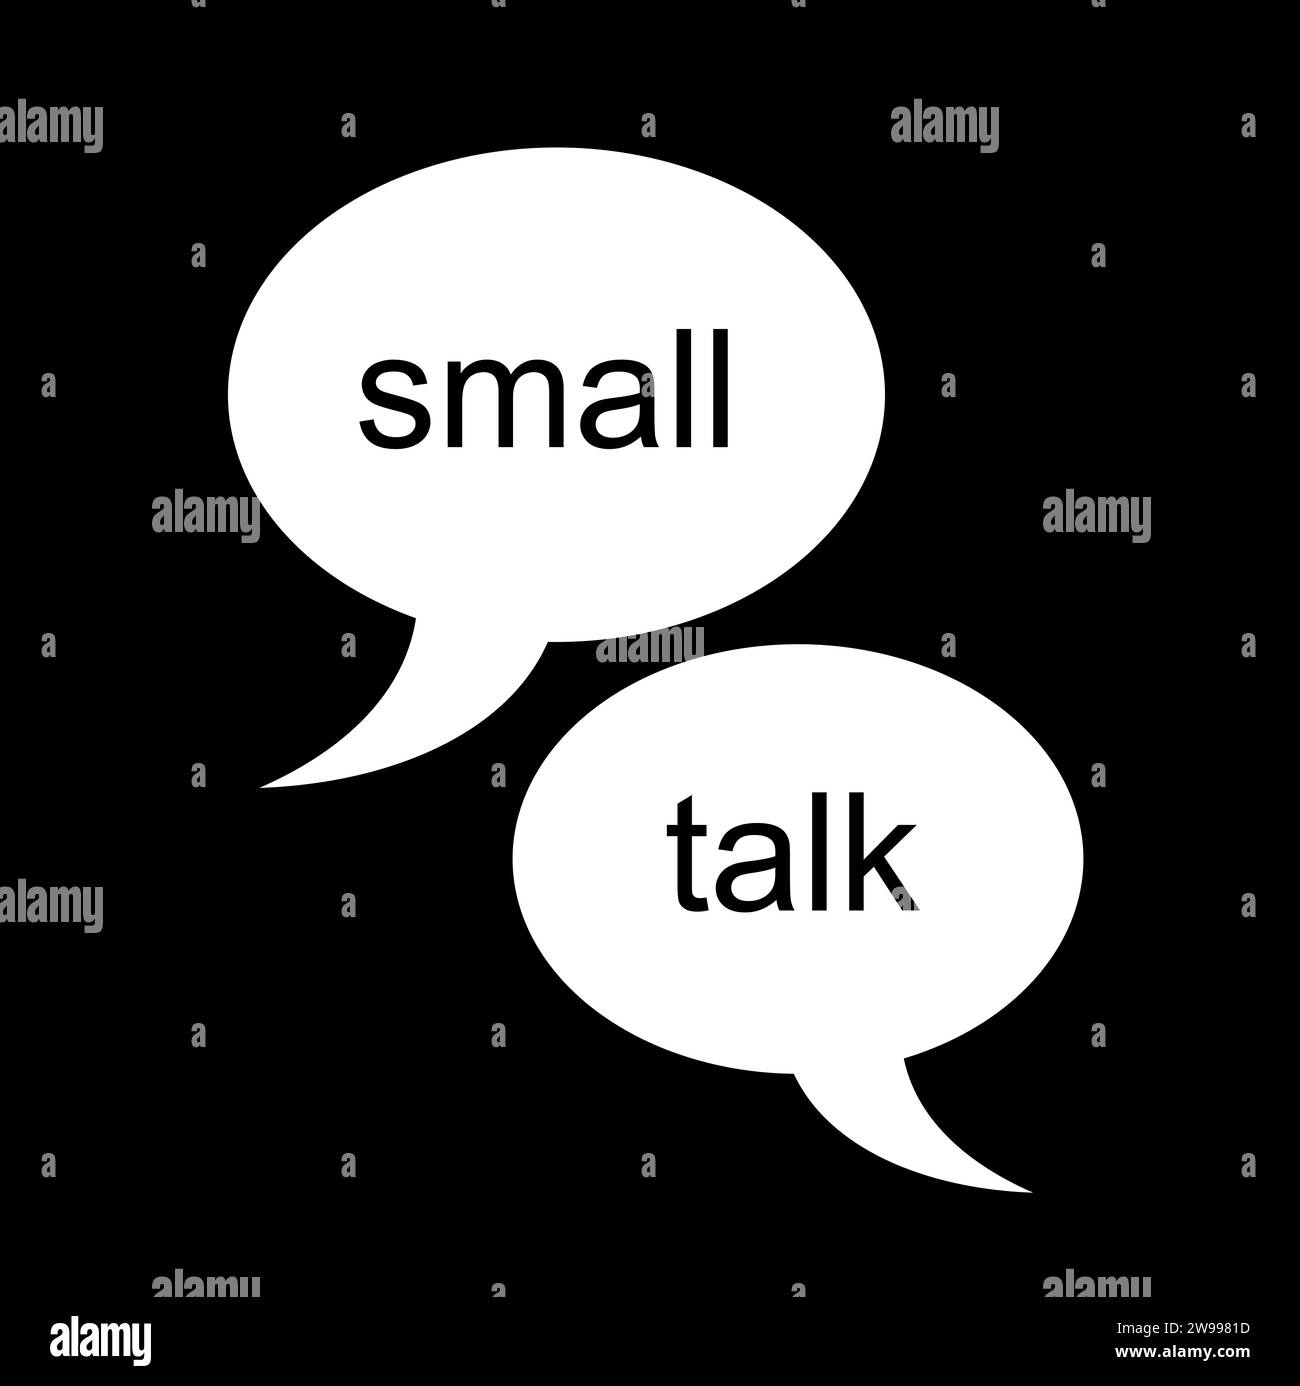 Small talk, smalltalk.  informal, banal and shallow interpersonal communication and conversation. Socialization through language and verbal interactio Stock Photo